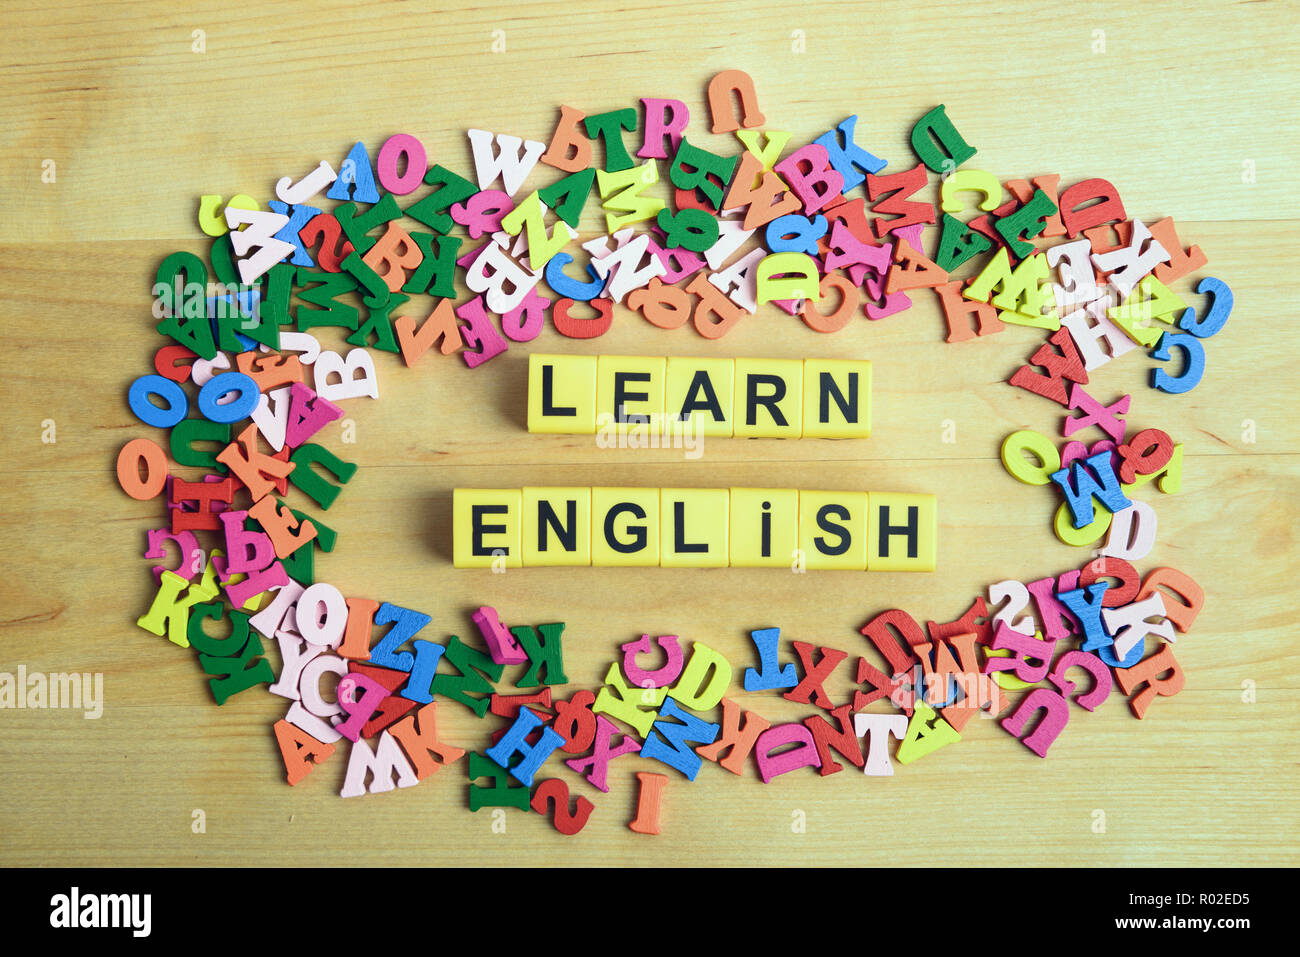 Learn English message near a pile of other letters over wood board background Stock Photo